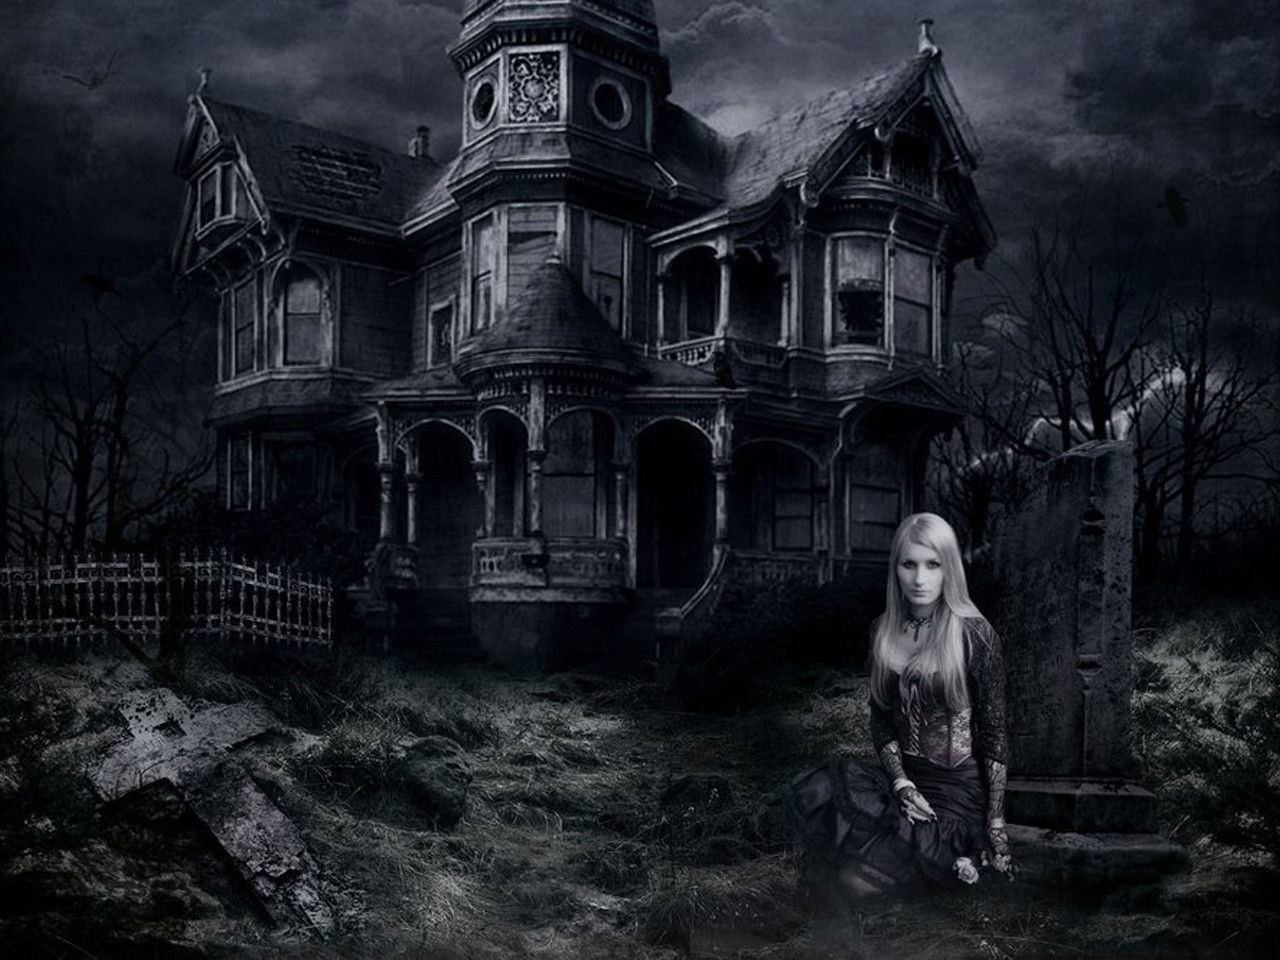 1280x960 Haunted House Desktop Wallpaper Haunted Mansion Wallpaper Halloween Background Scary Houses